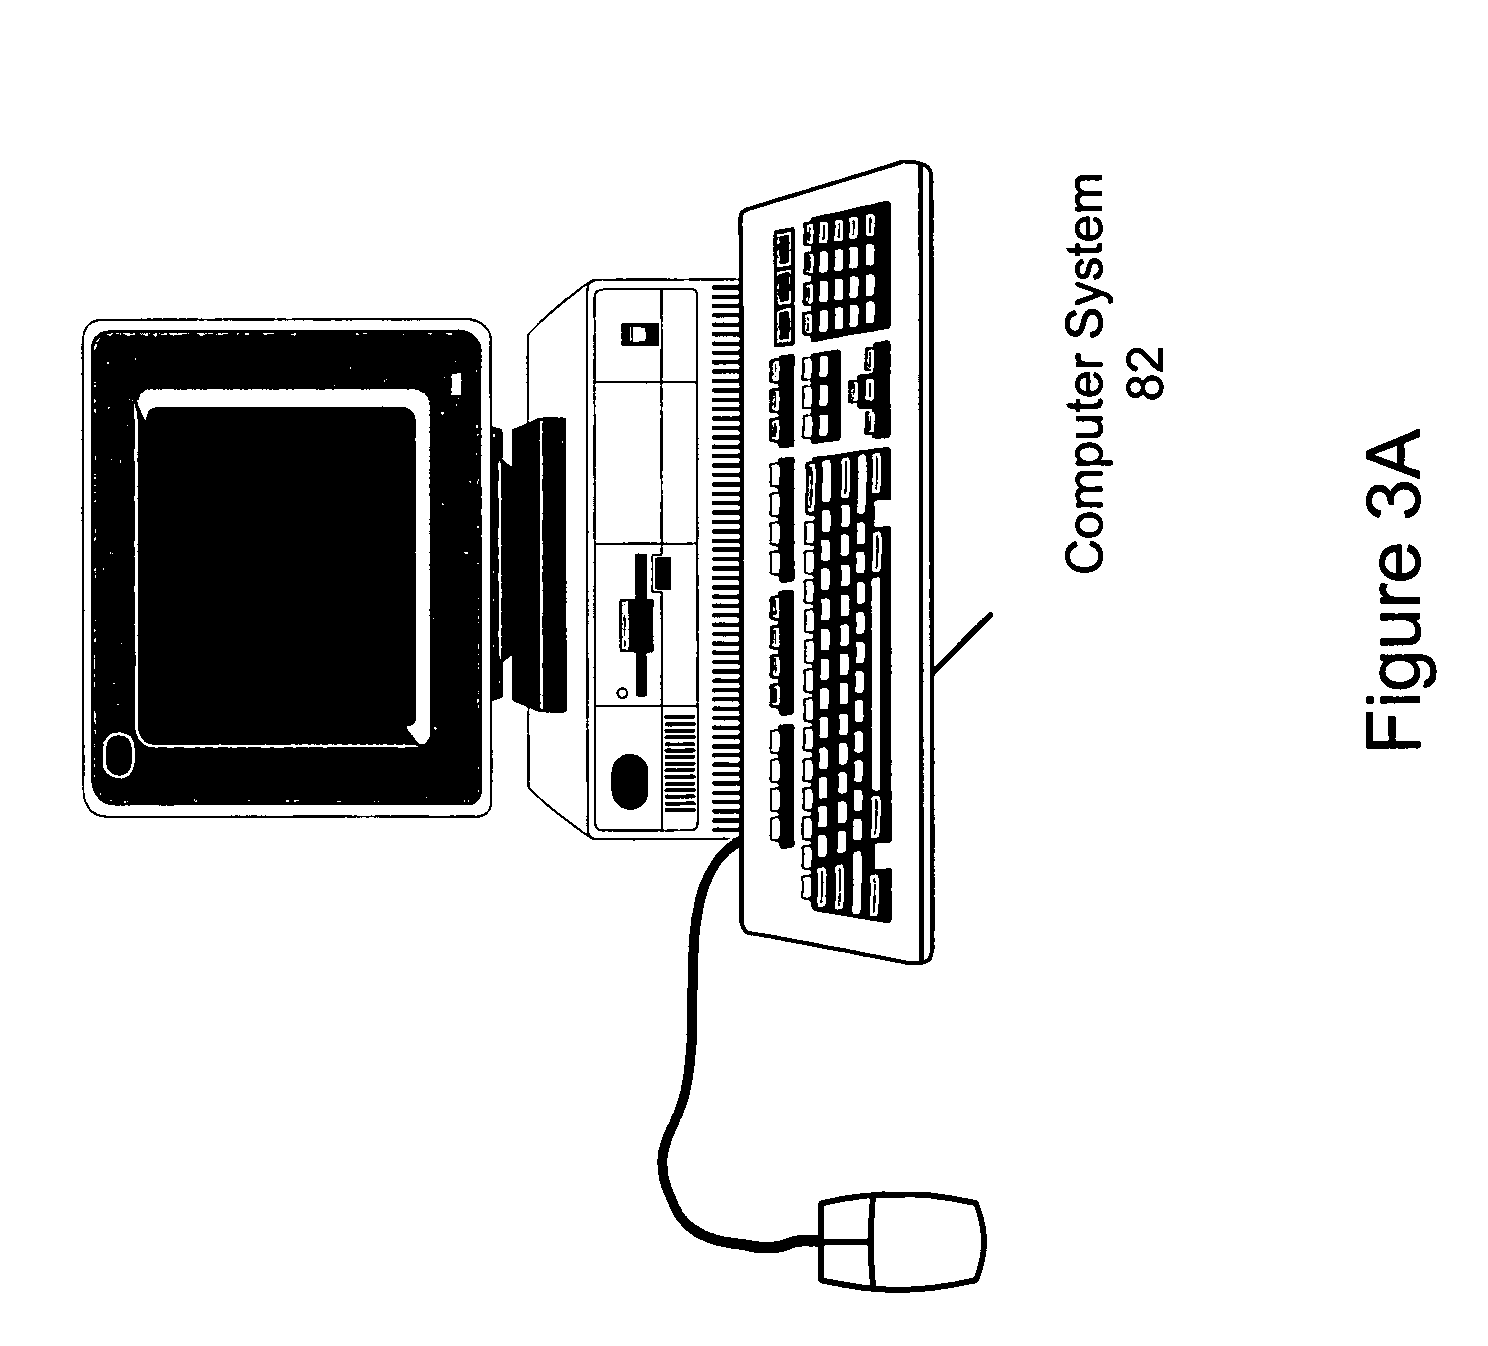 Application programming interface for synchronizing multiple instrumentation devices